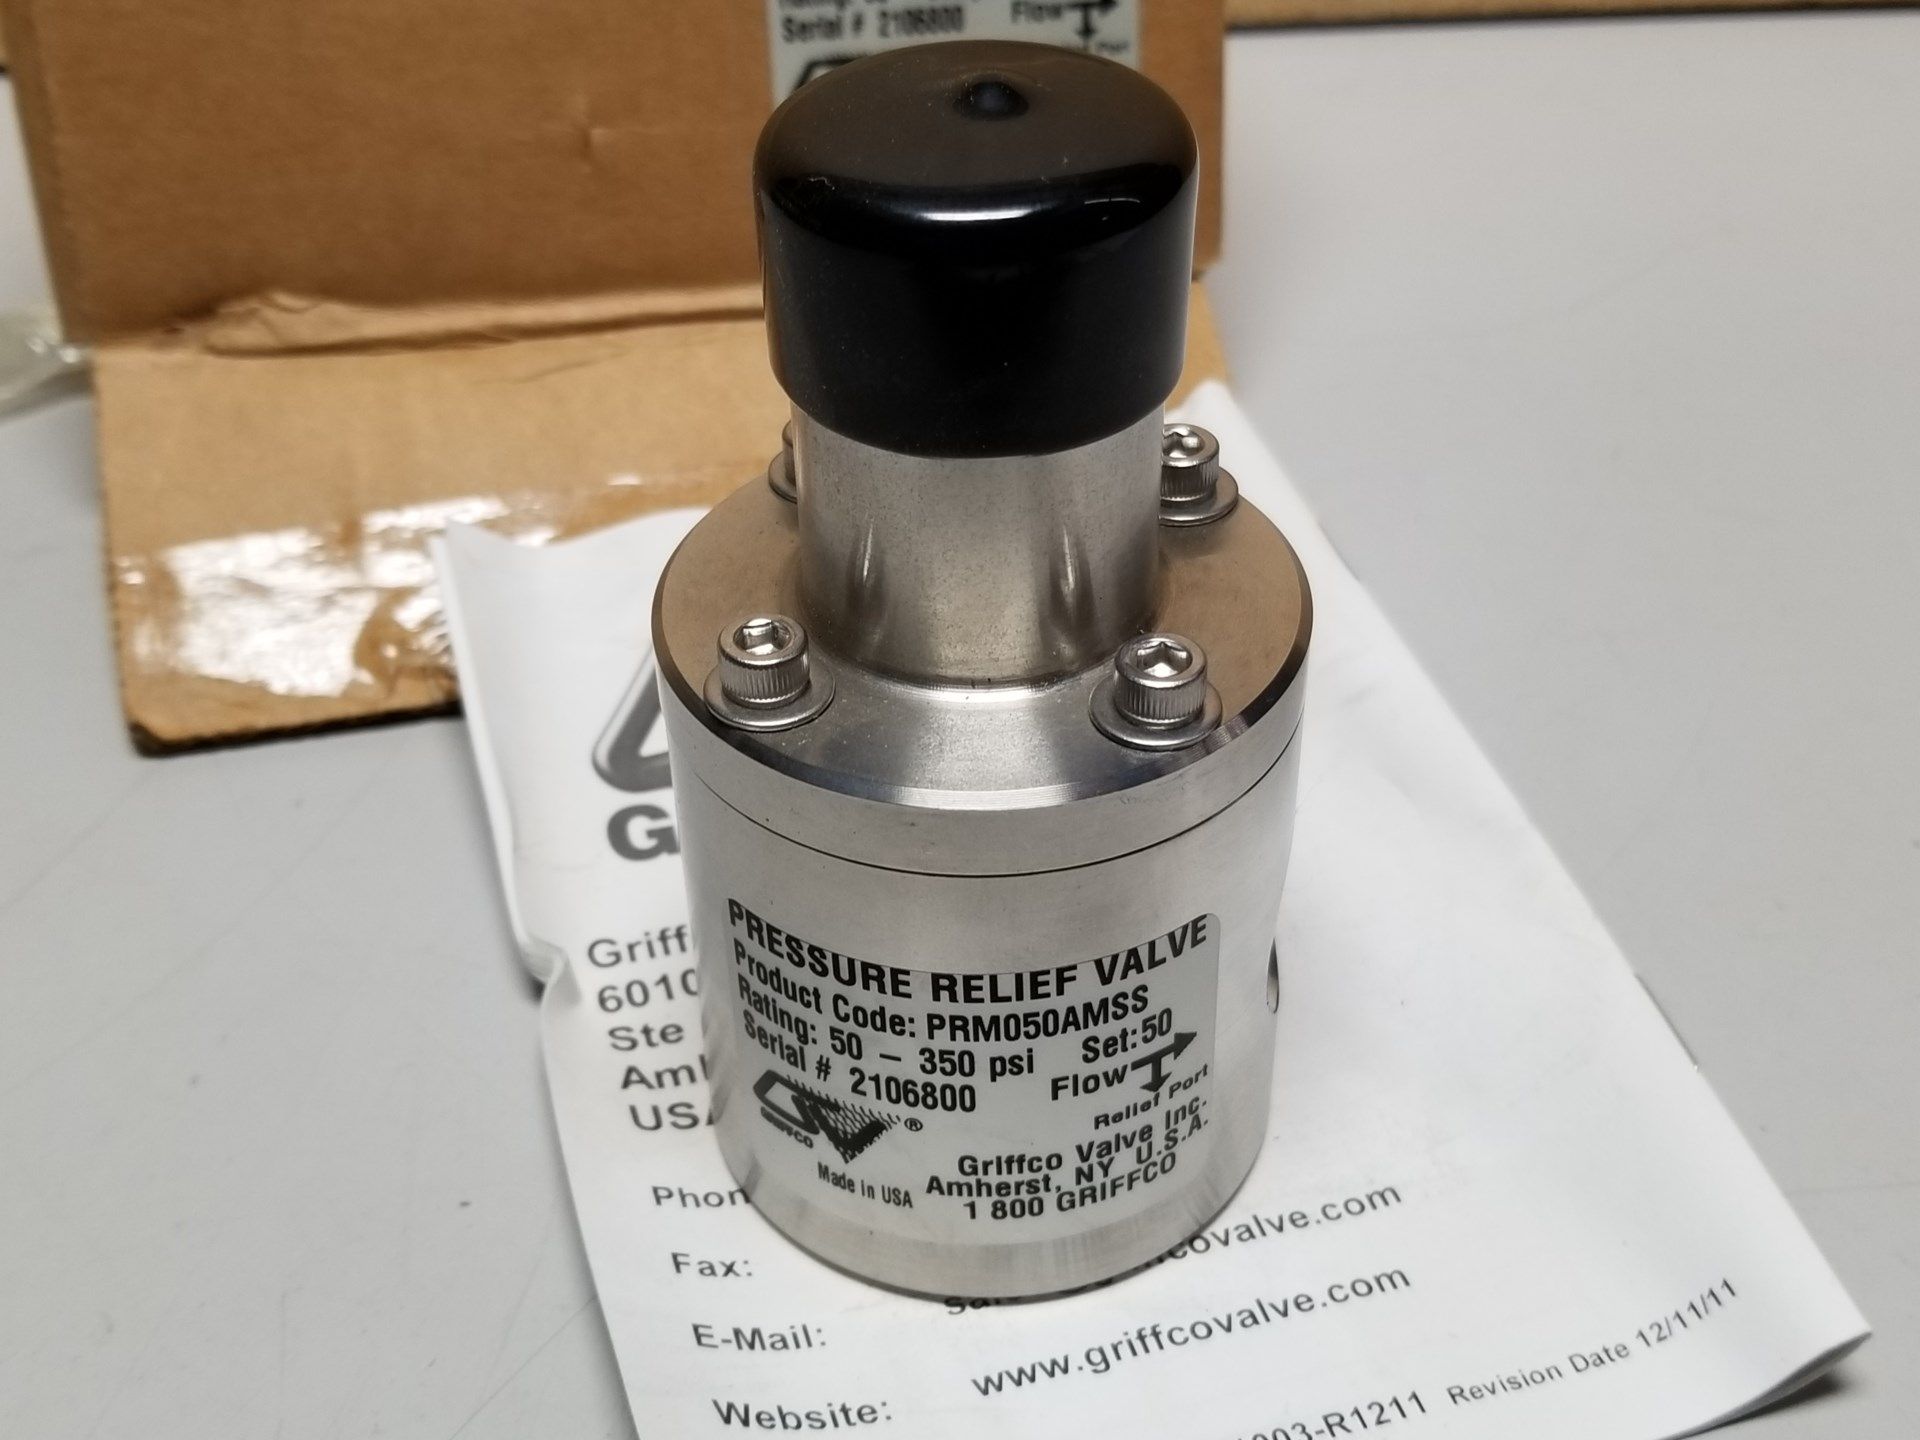 NEW GRIFFCO PRESSURE RELIEF VALVE - Image 4 of 5